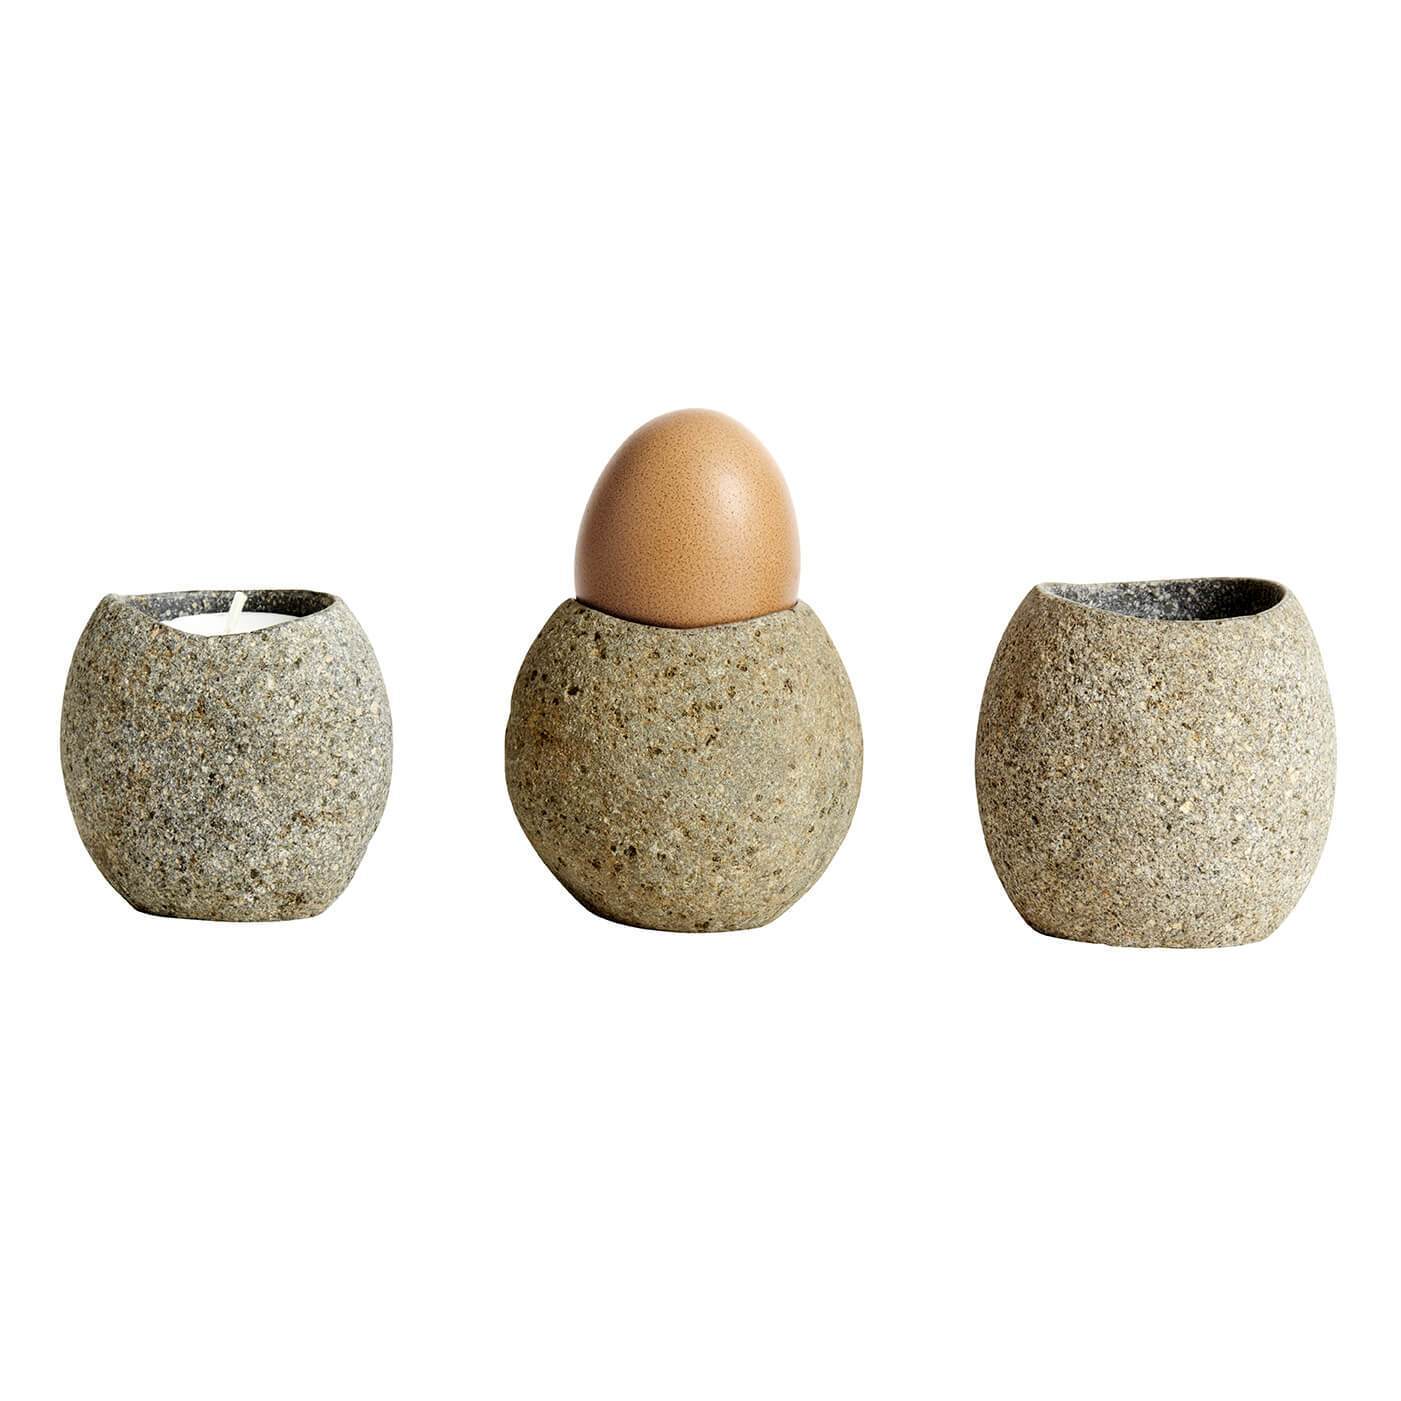 Muubs Valley Egg Cup Riverstone, 7 cm